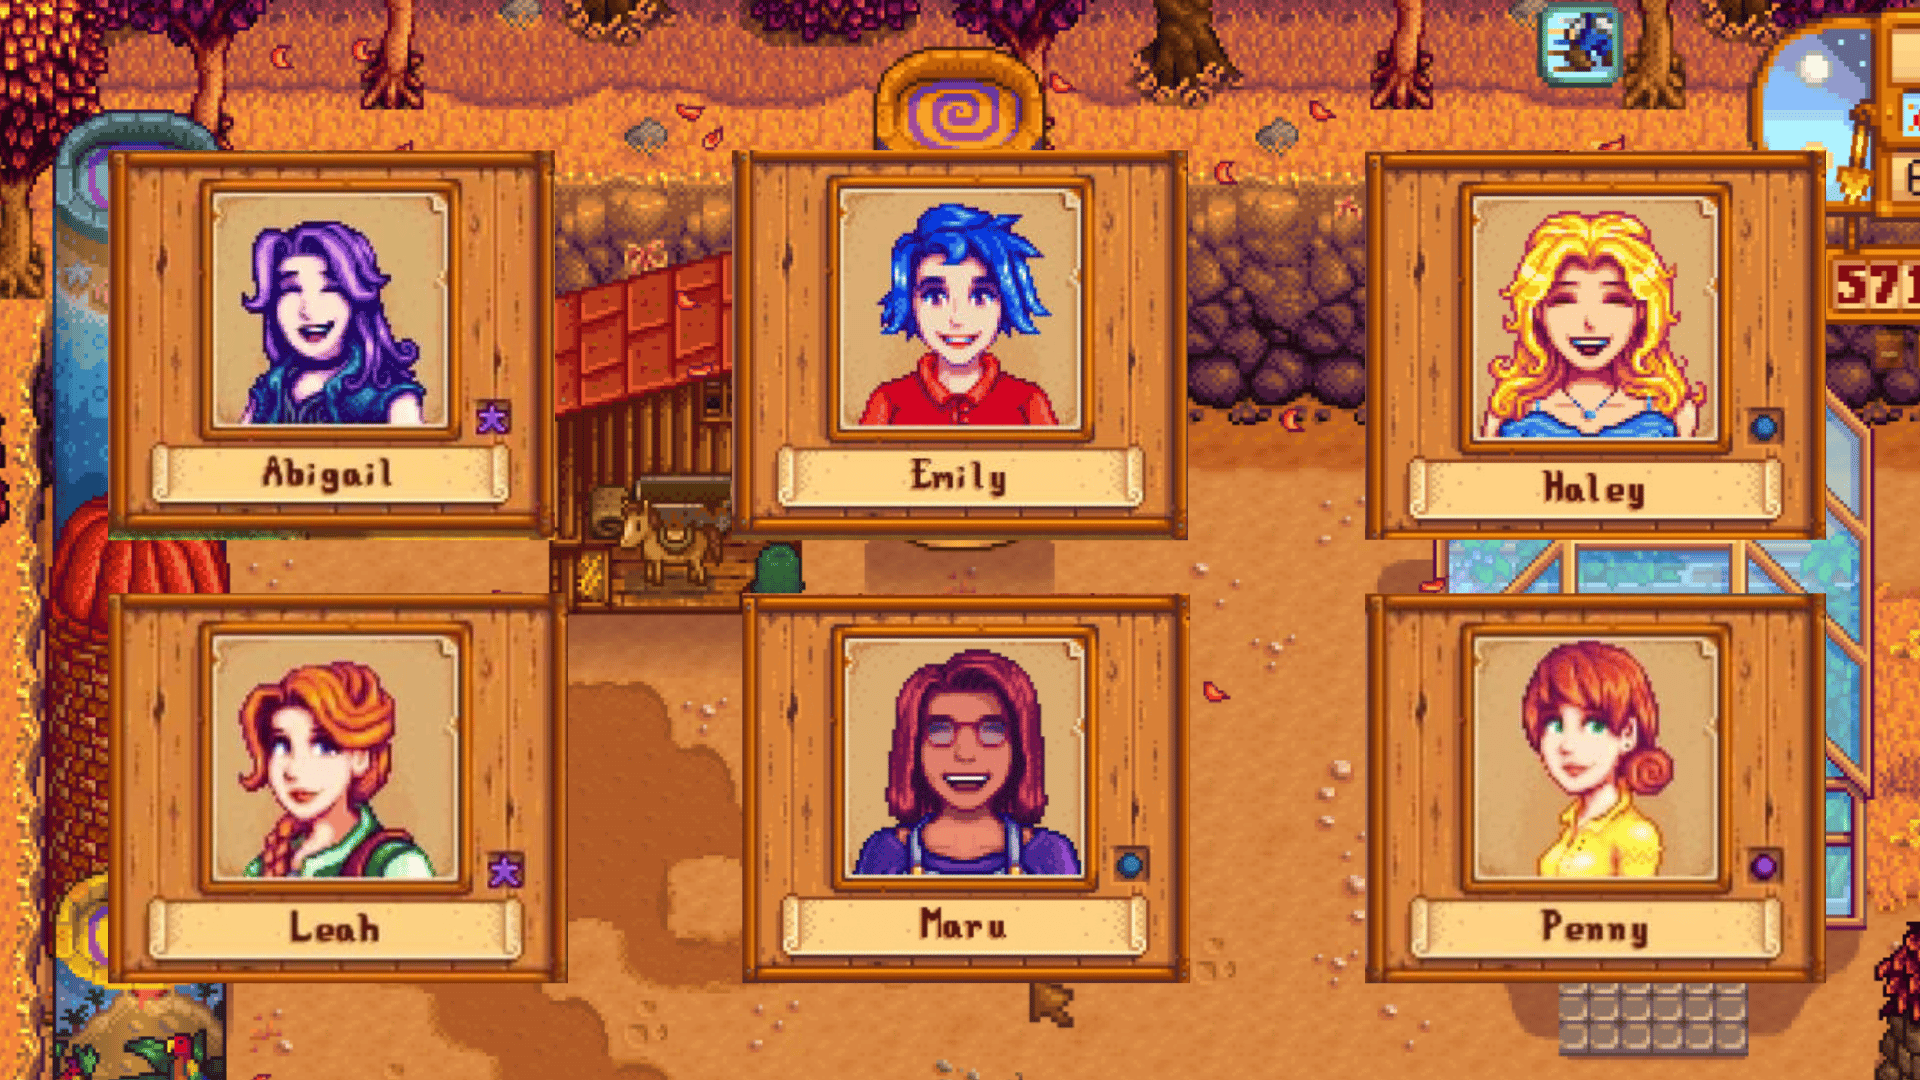 Complete list of bachelorettes in Stardew Valley from A to Z.